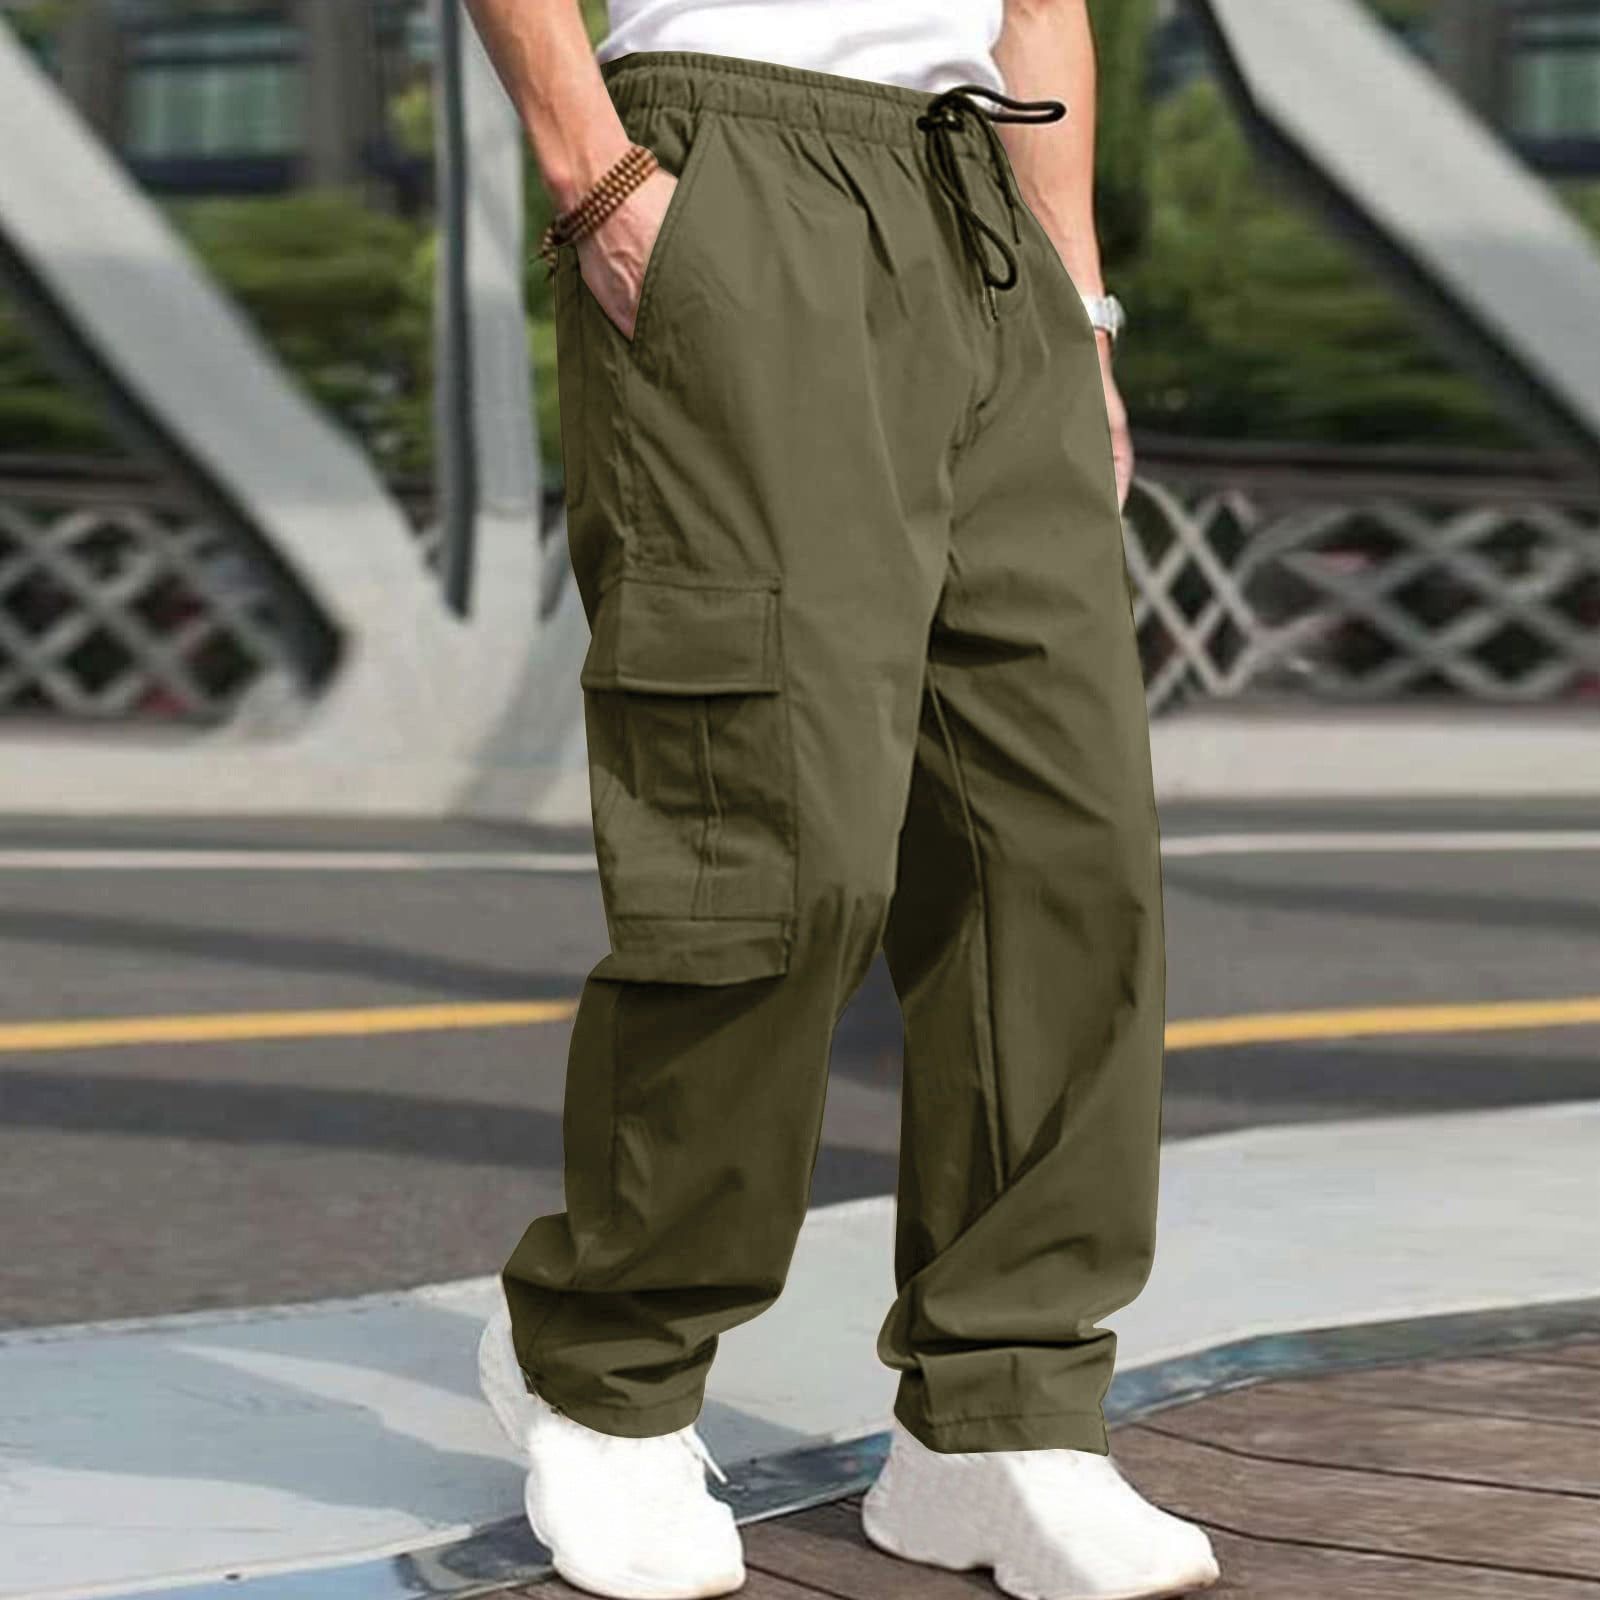 Men's Cargo Cargo Lightweight Work Pants Hiking Ripstop Cargo Pants Relaxed  Fit Mens Cargo Pant-Reg and Big and Tall Sizes Cargo Pants for Men